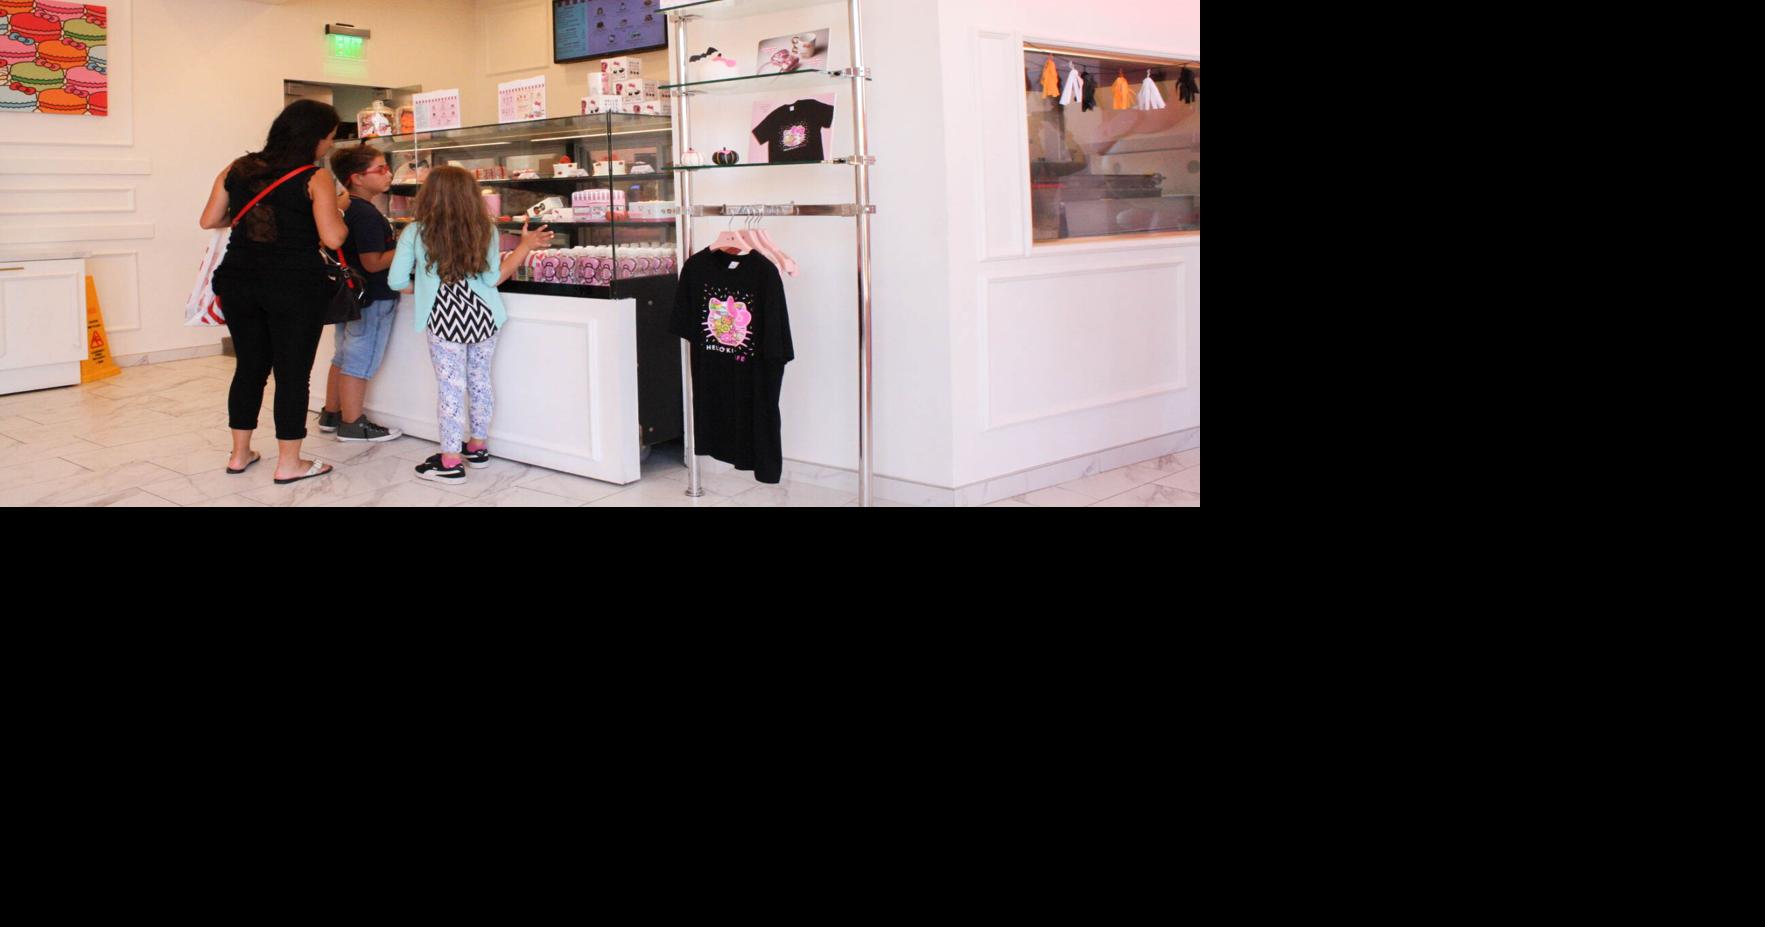 First-ever Hello Kitty Grand Cafe to open in Irvine, CA